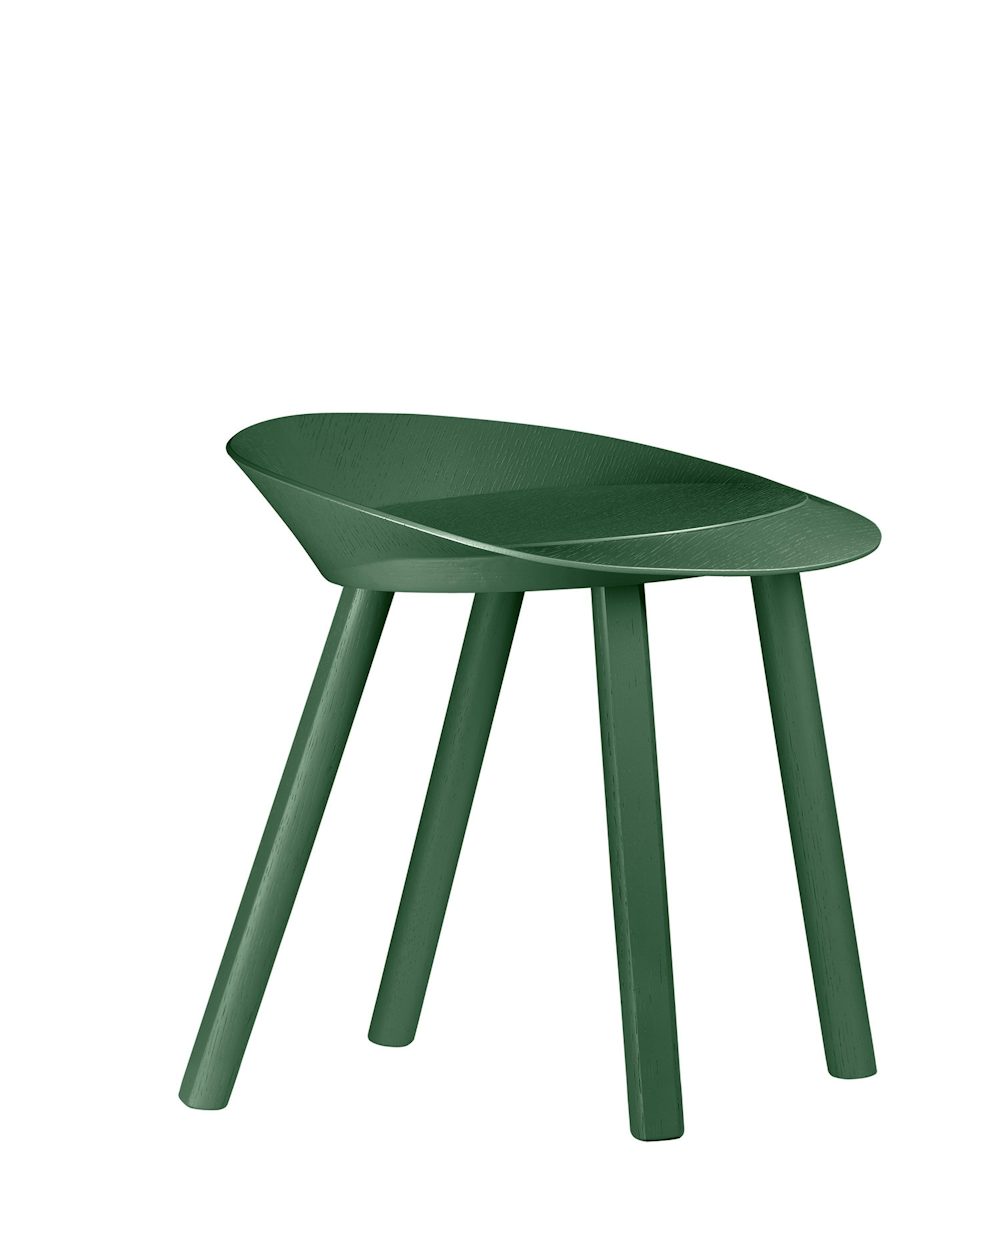 e15 mr collins stool in ivy green